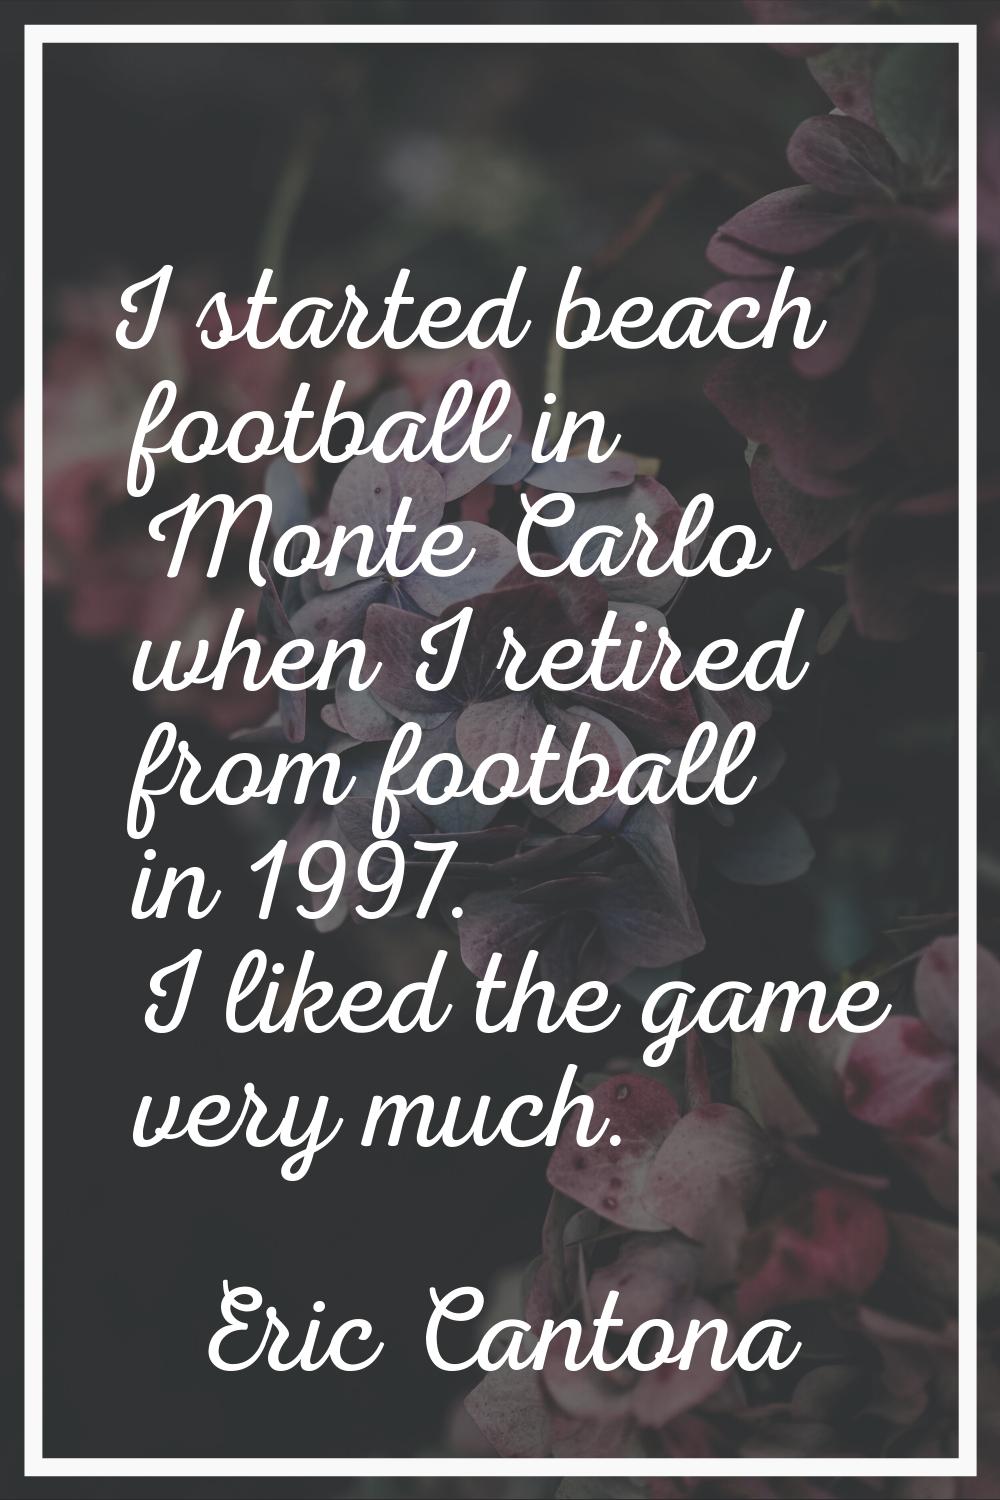 I started beach football in Monte Carlo when I retired from football in 1997. I liked the game very